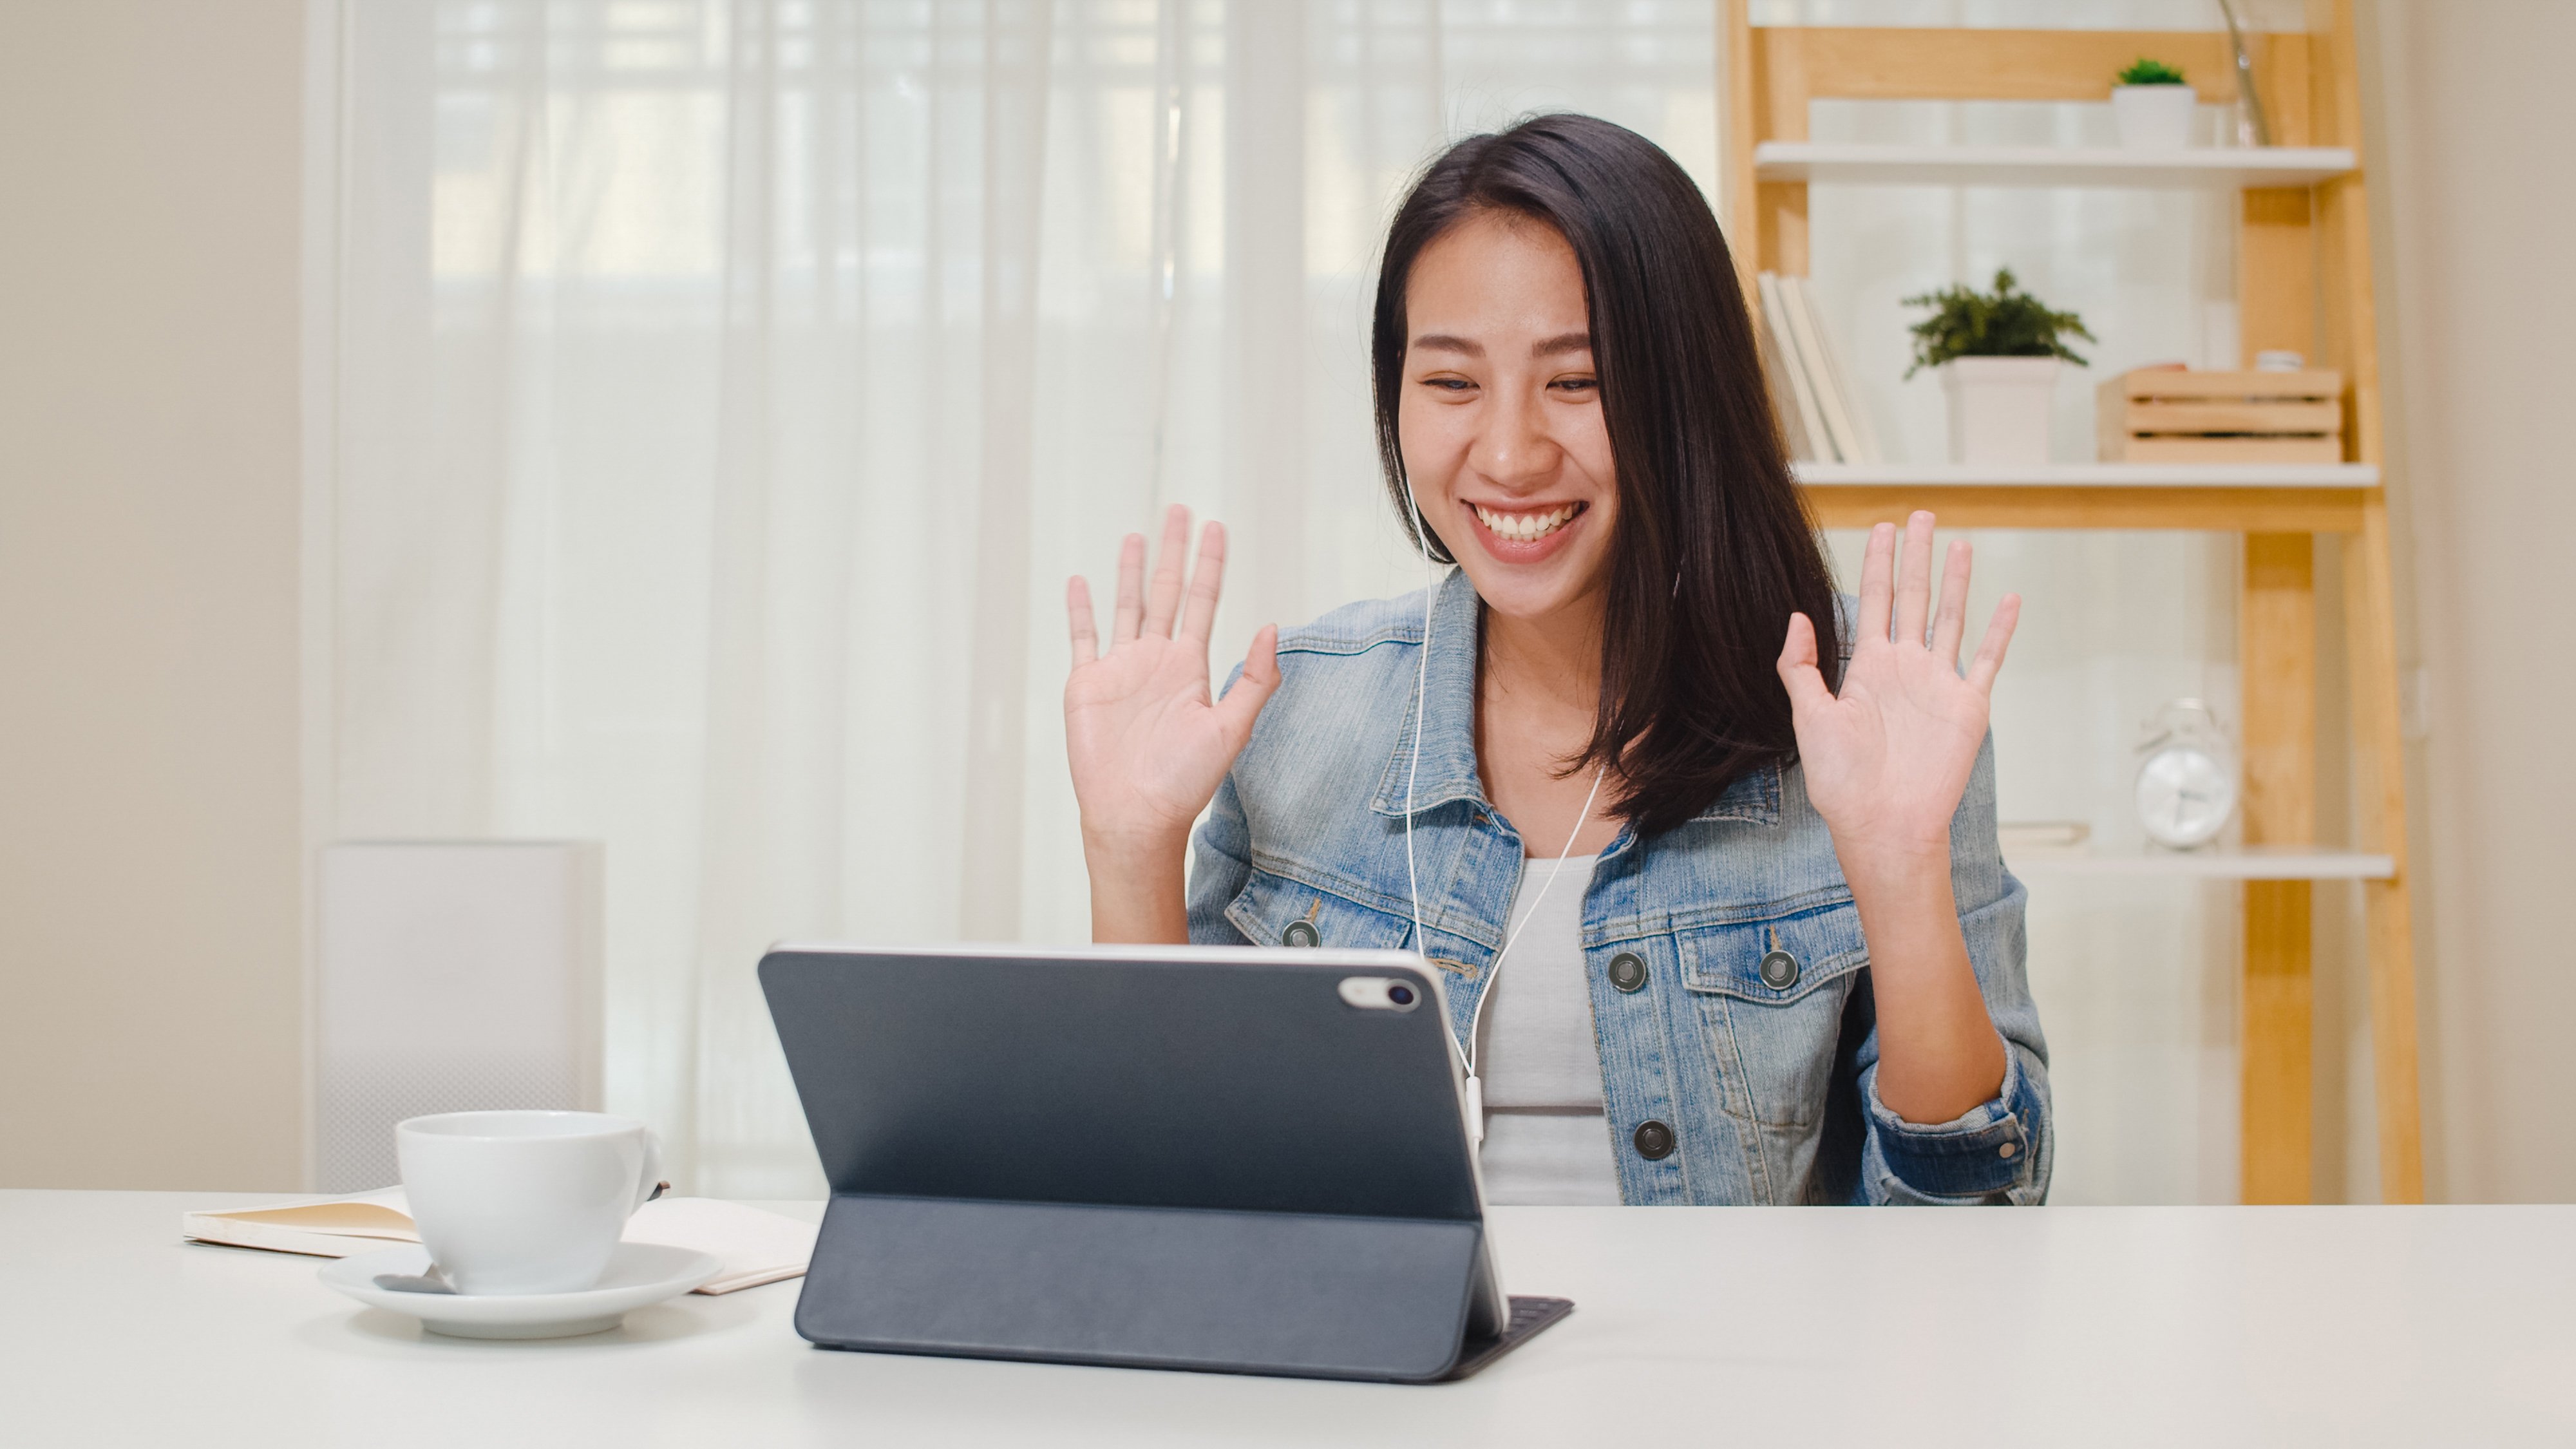 freelance-business-women-casual-wear-using-tablet-working-call-video-conference-with-customer-workplace-living-room-home-happy-young-asian-girl-relax-sitting-desk-job-internet-2